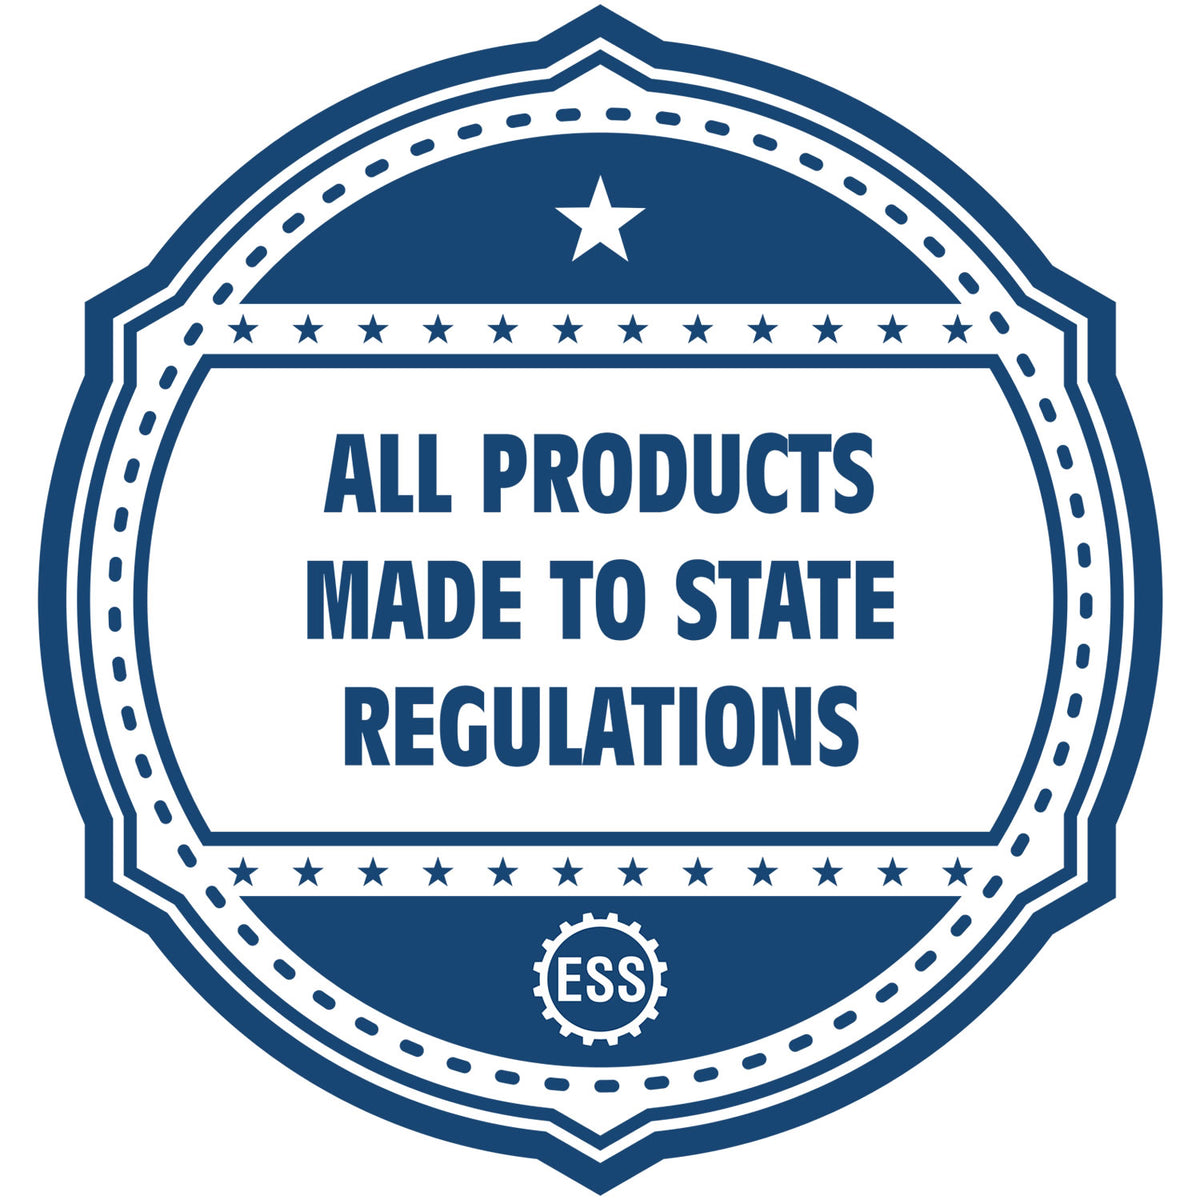 An icon or badge element for the Handheld Alabama Land Surveyor Seal showing that this product is made in compliance with state regulations.